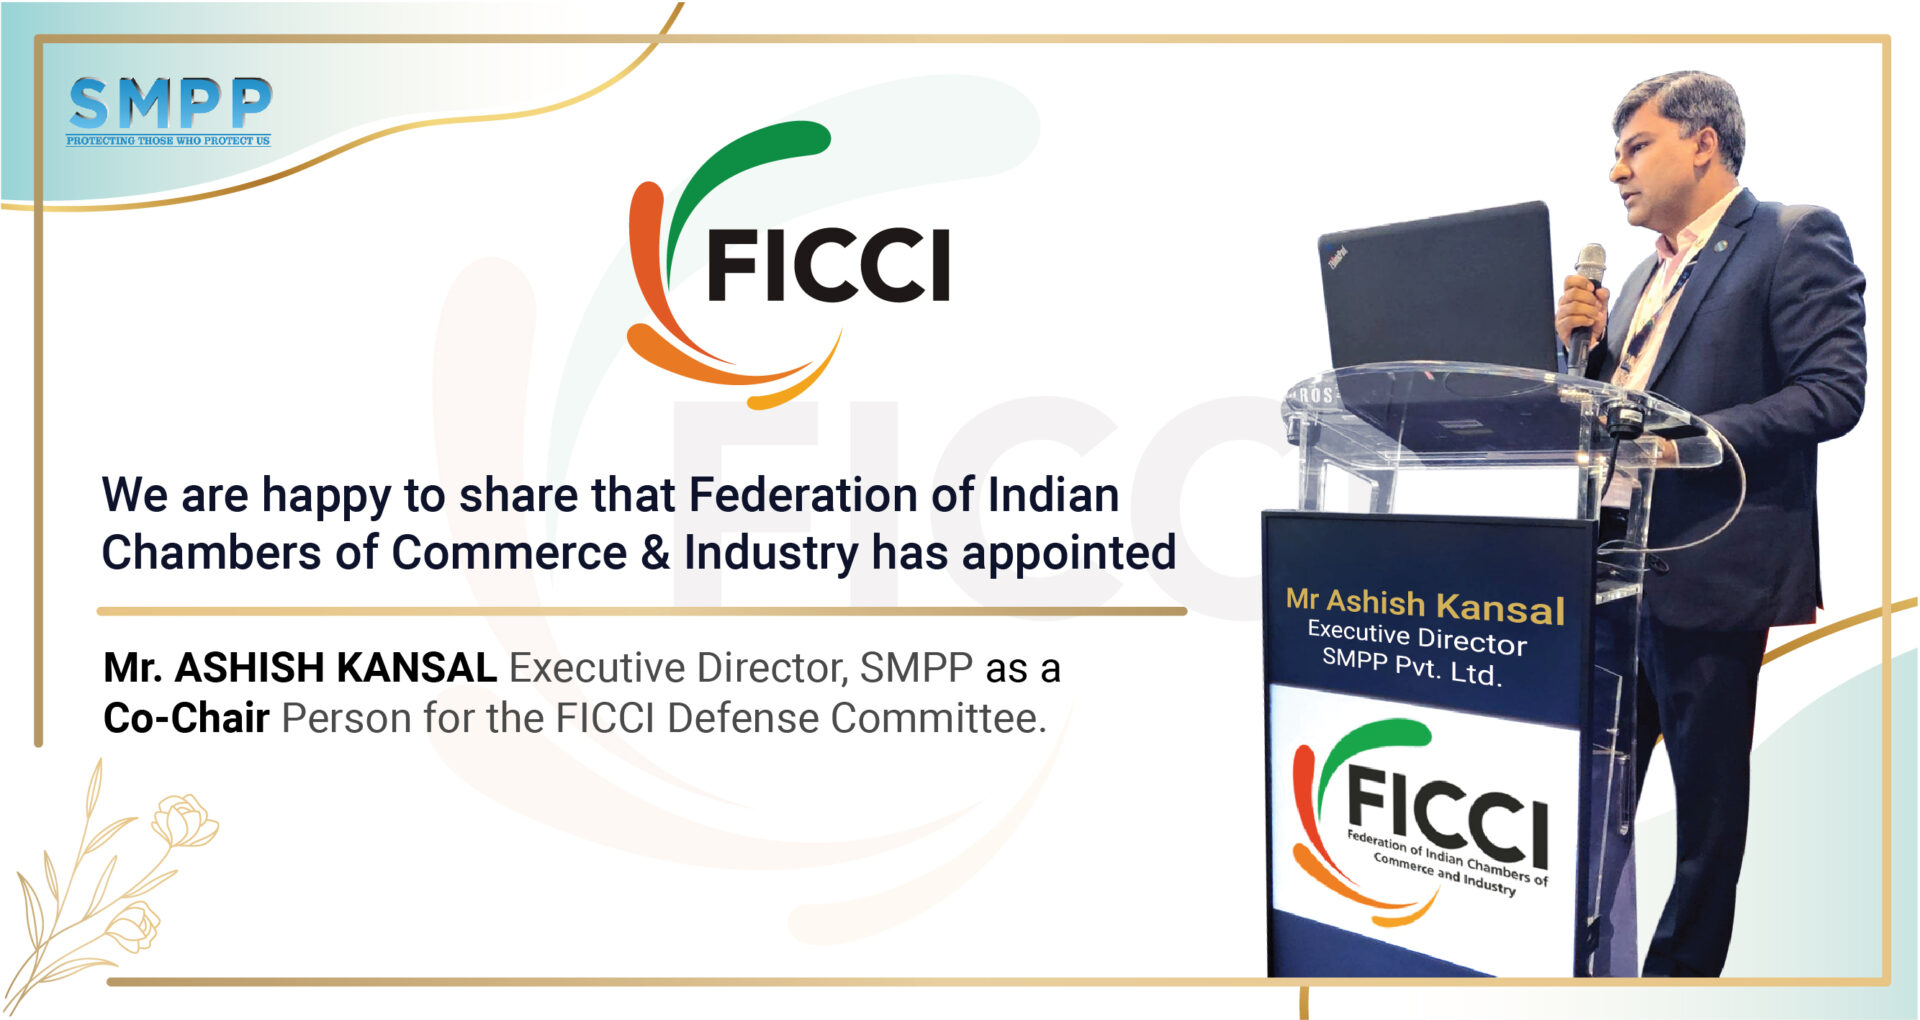 SMPP is happy to share FICCI’s Nomination for Co-Chair FICCI Defense Committee.